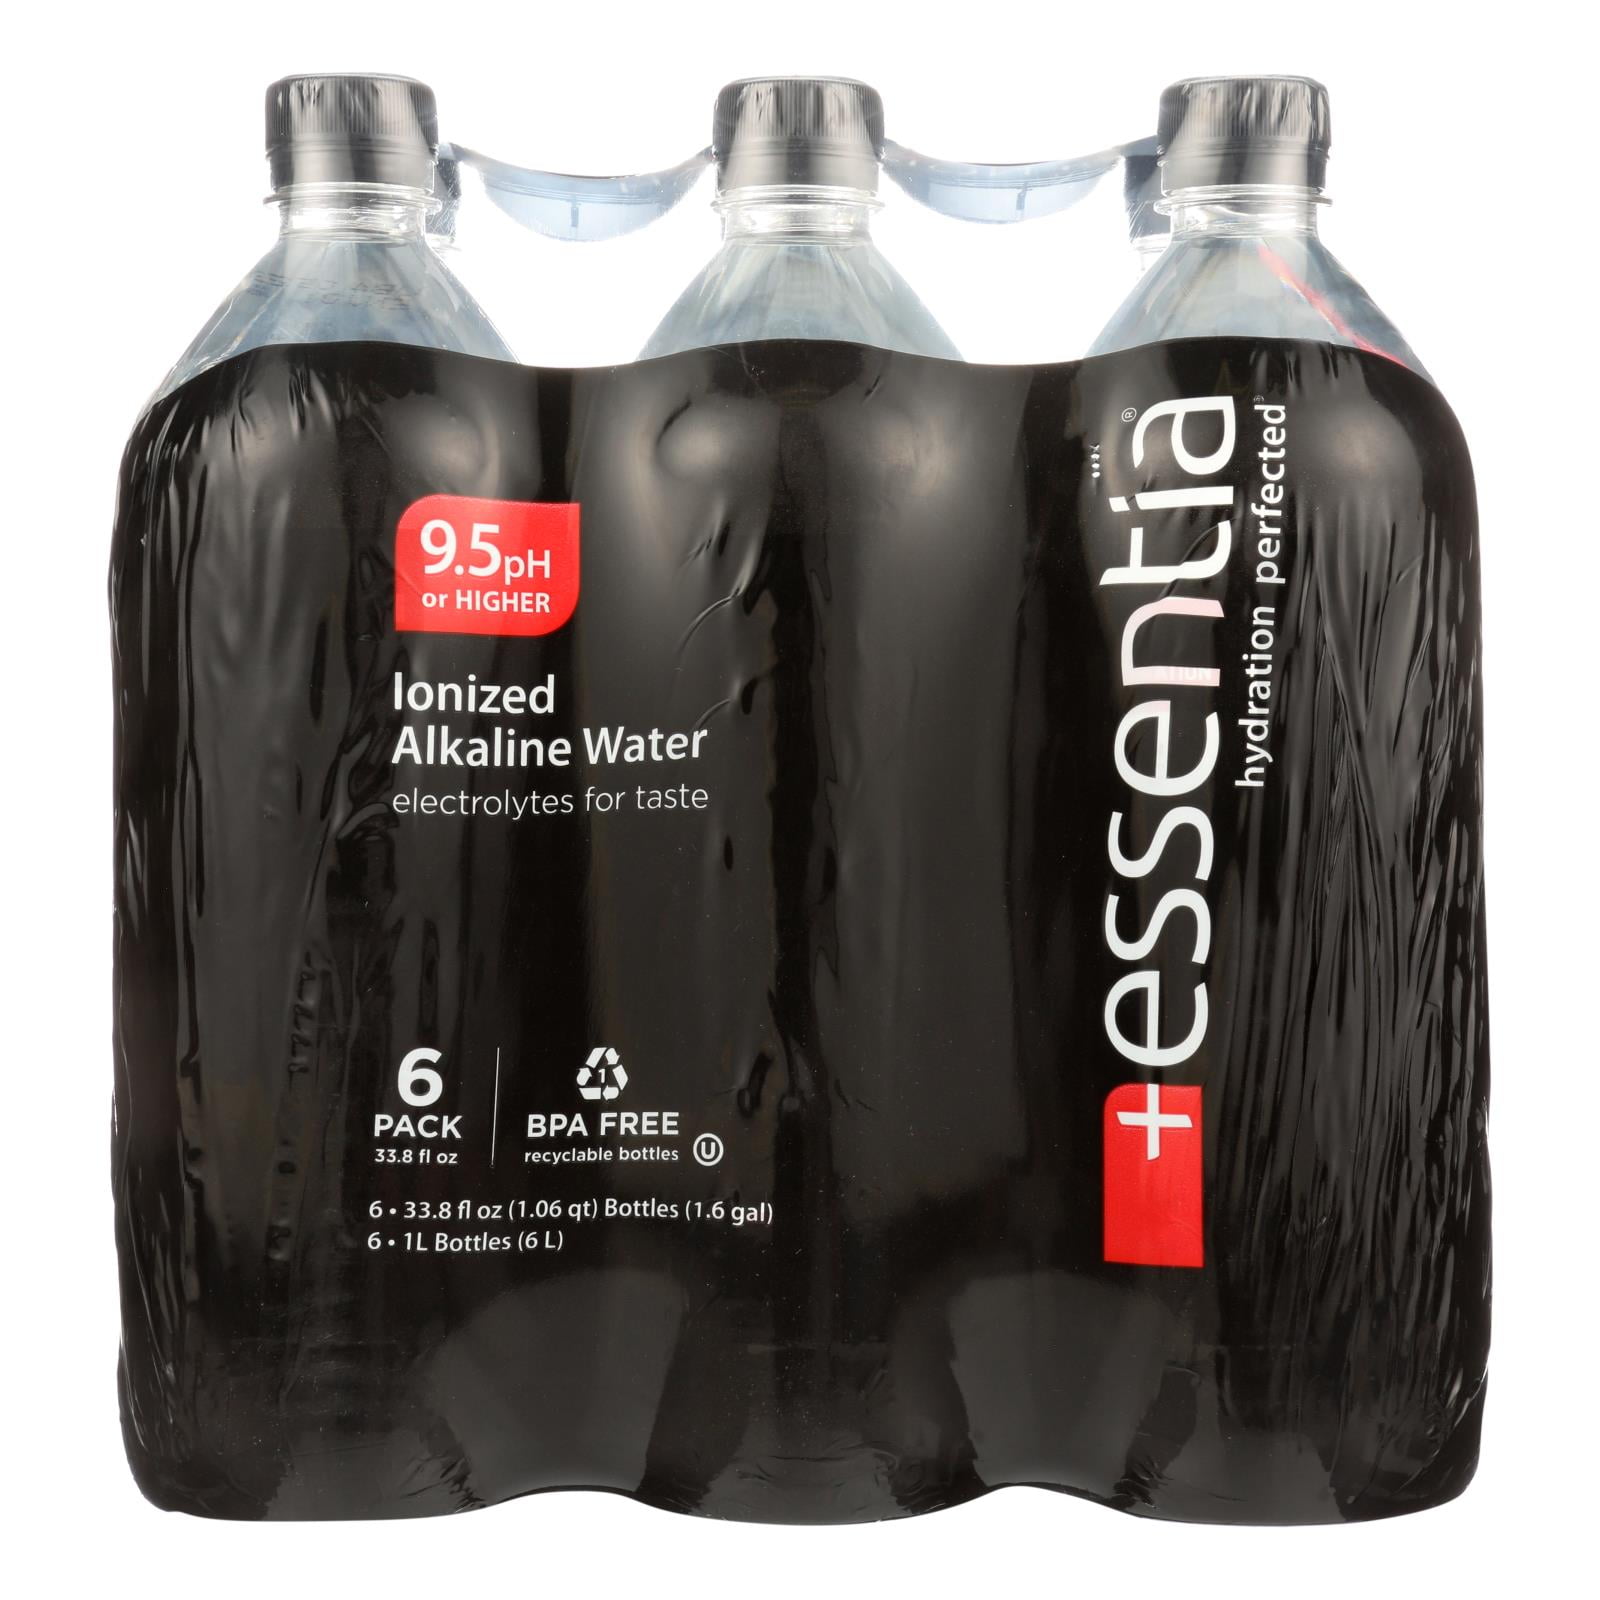 Essentia Hydration Perfected Drinking Water - 9.5 ph. - Case of 12 - 1